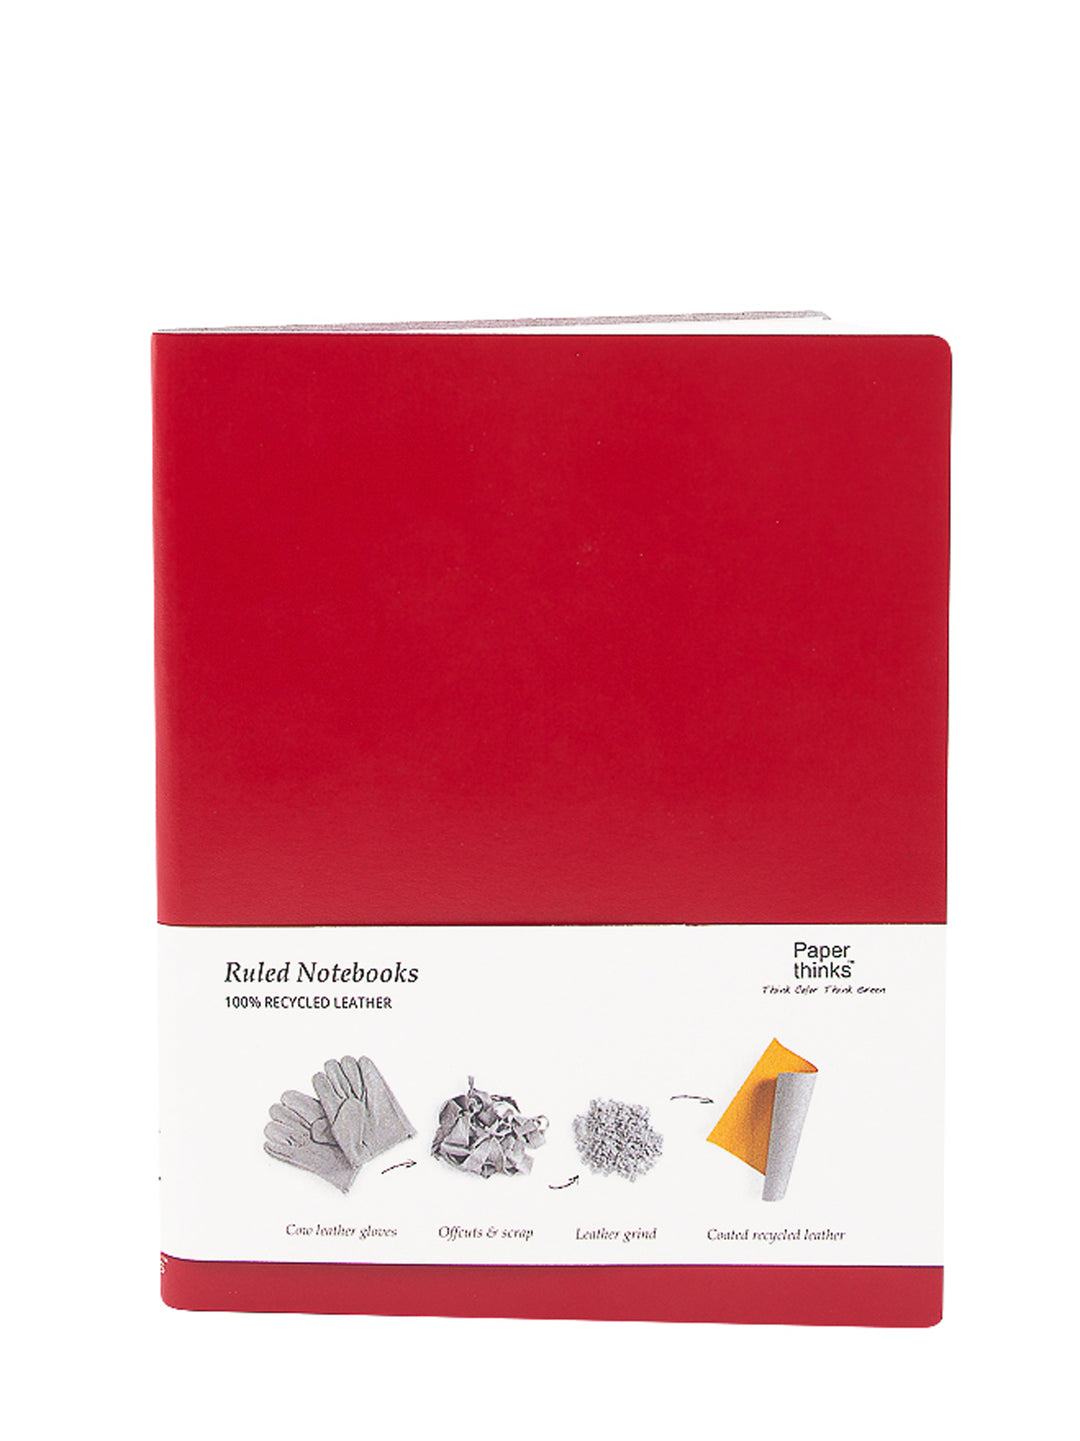 Paperthinks Recycled Leather Extra Large Journal Lined Scarlet Red